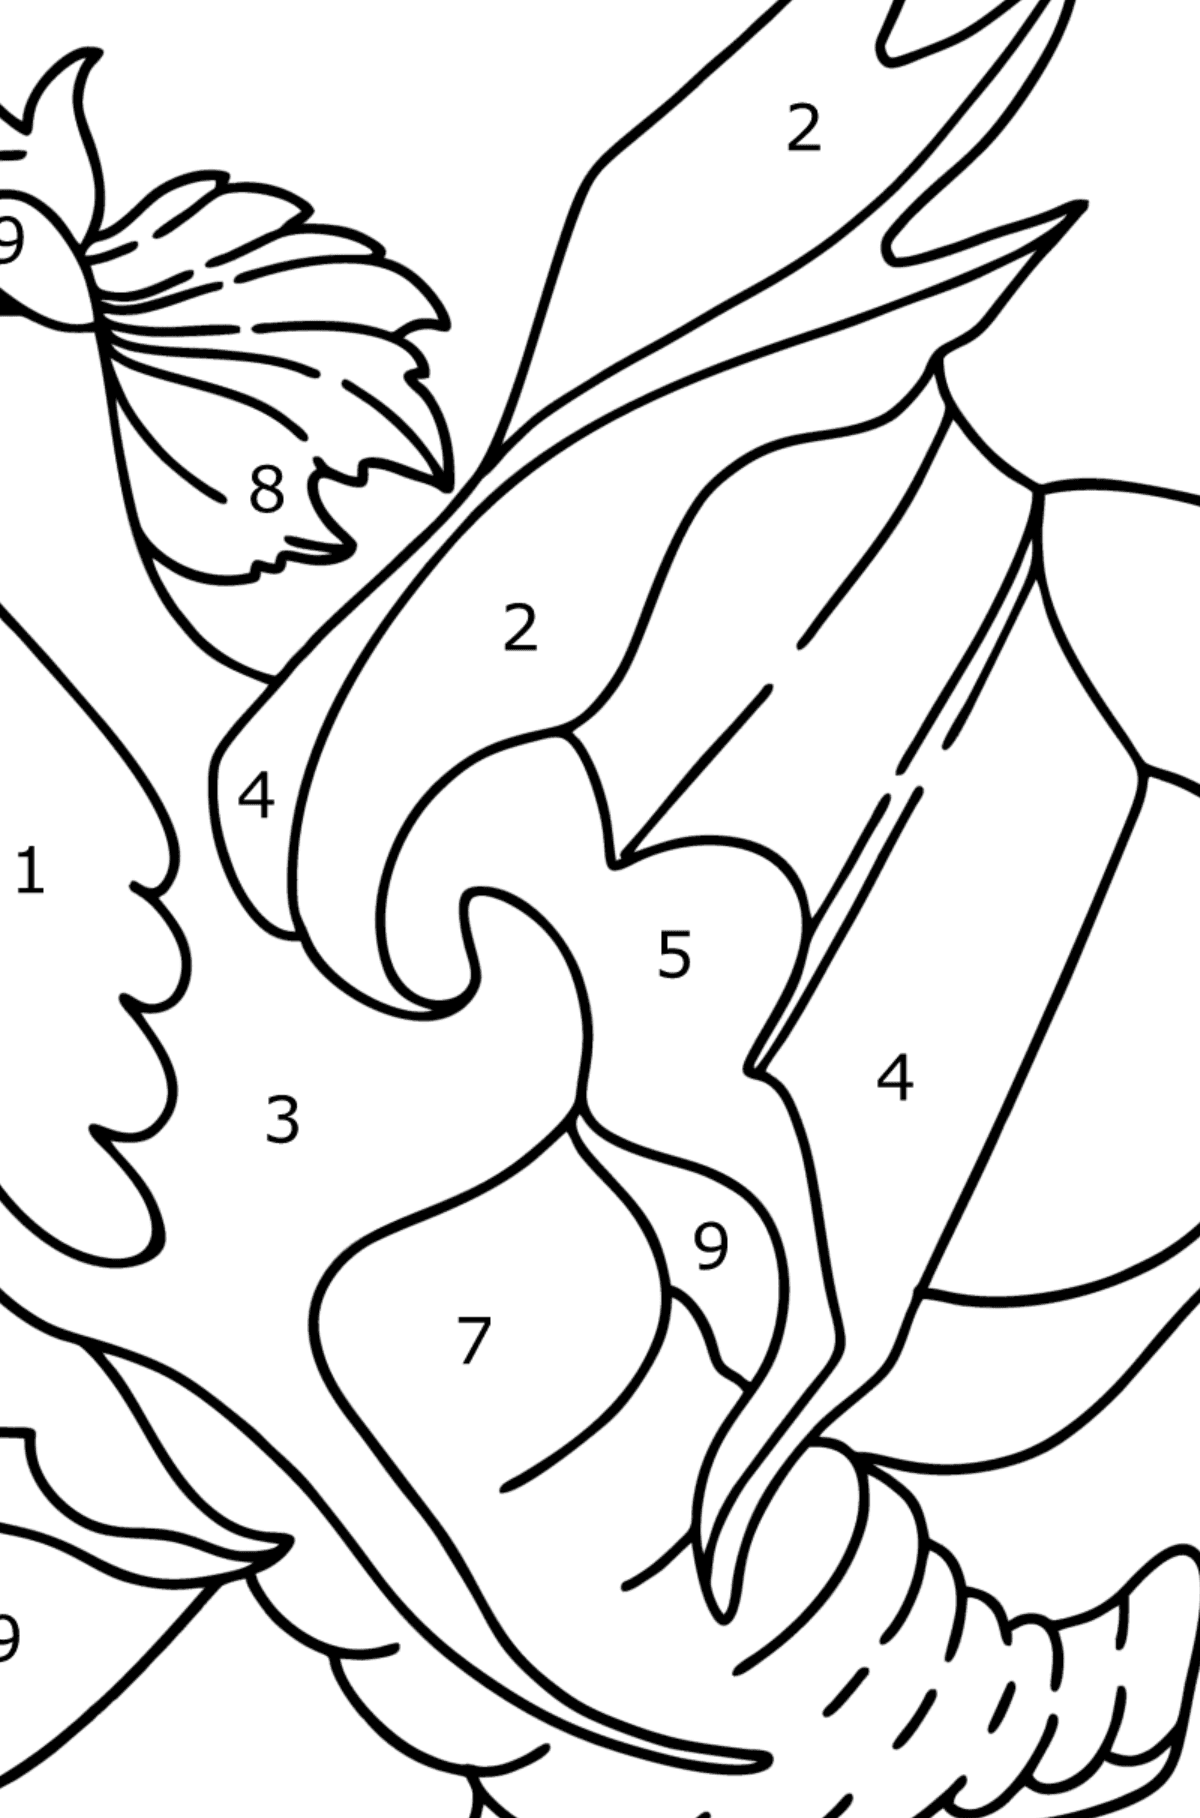 Lucky Dragon coloring page - Coloring by Numbers for Kids